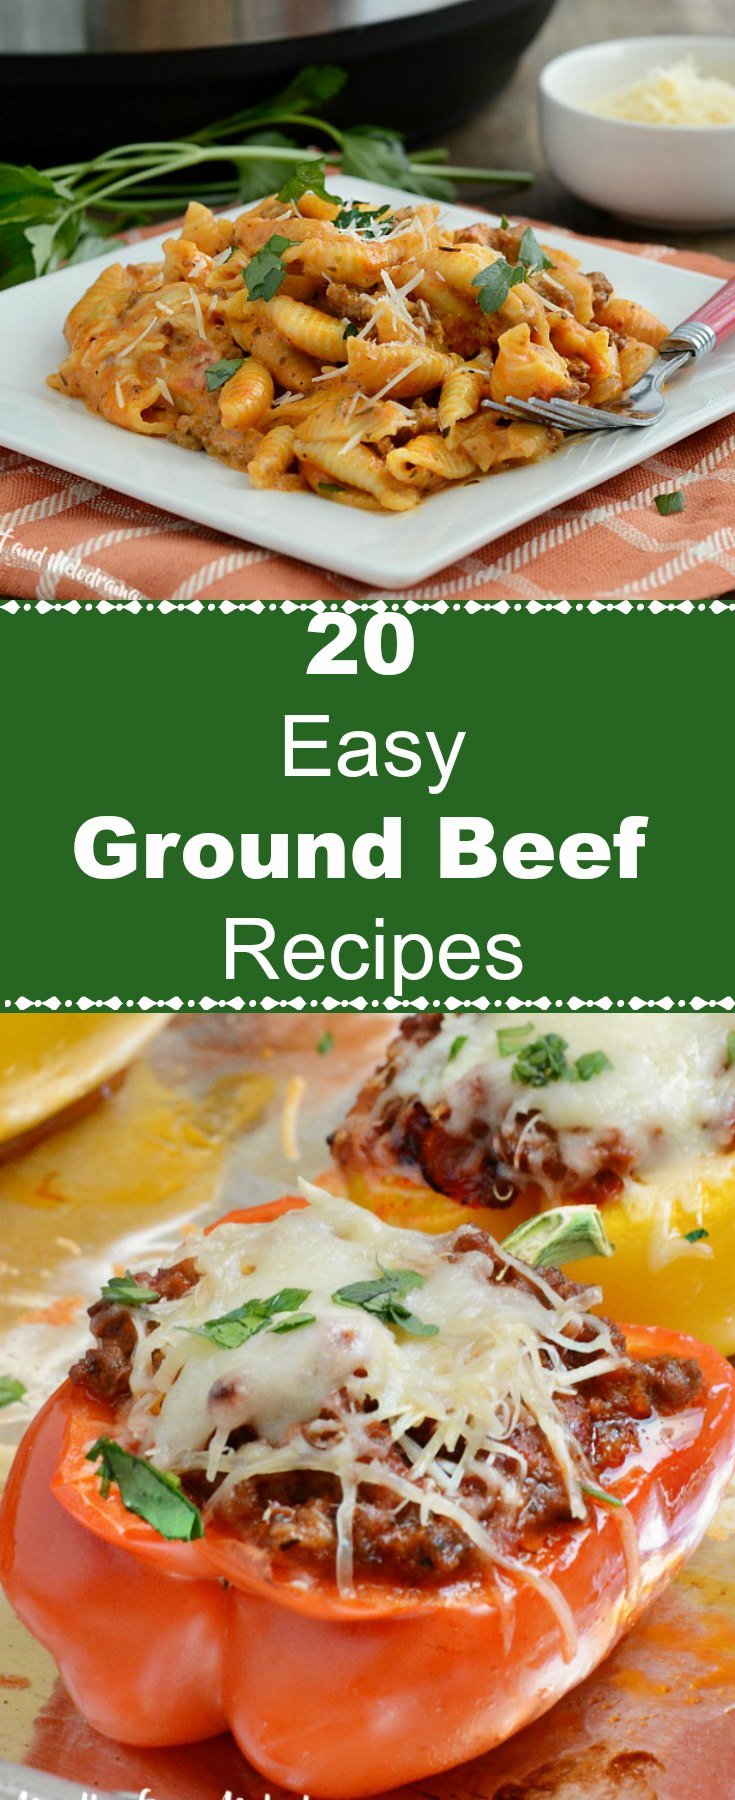 20 Easy Ground Beef Recipes - Meatloaf and Melodrama